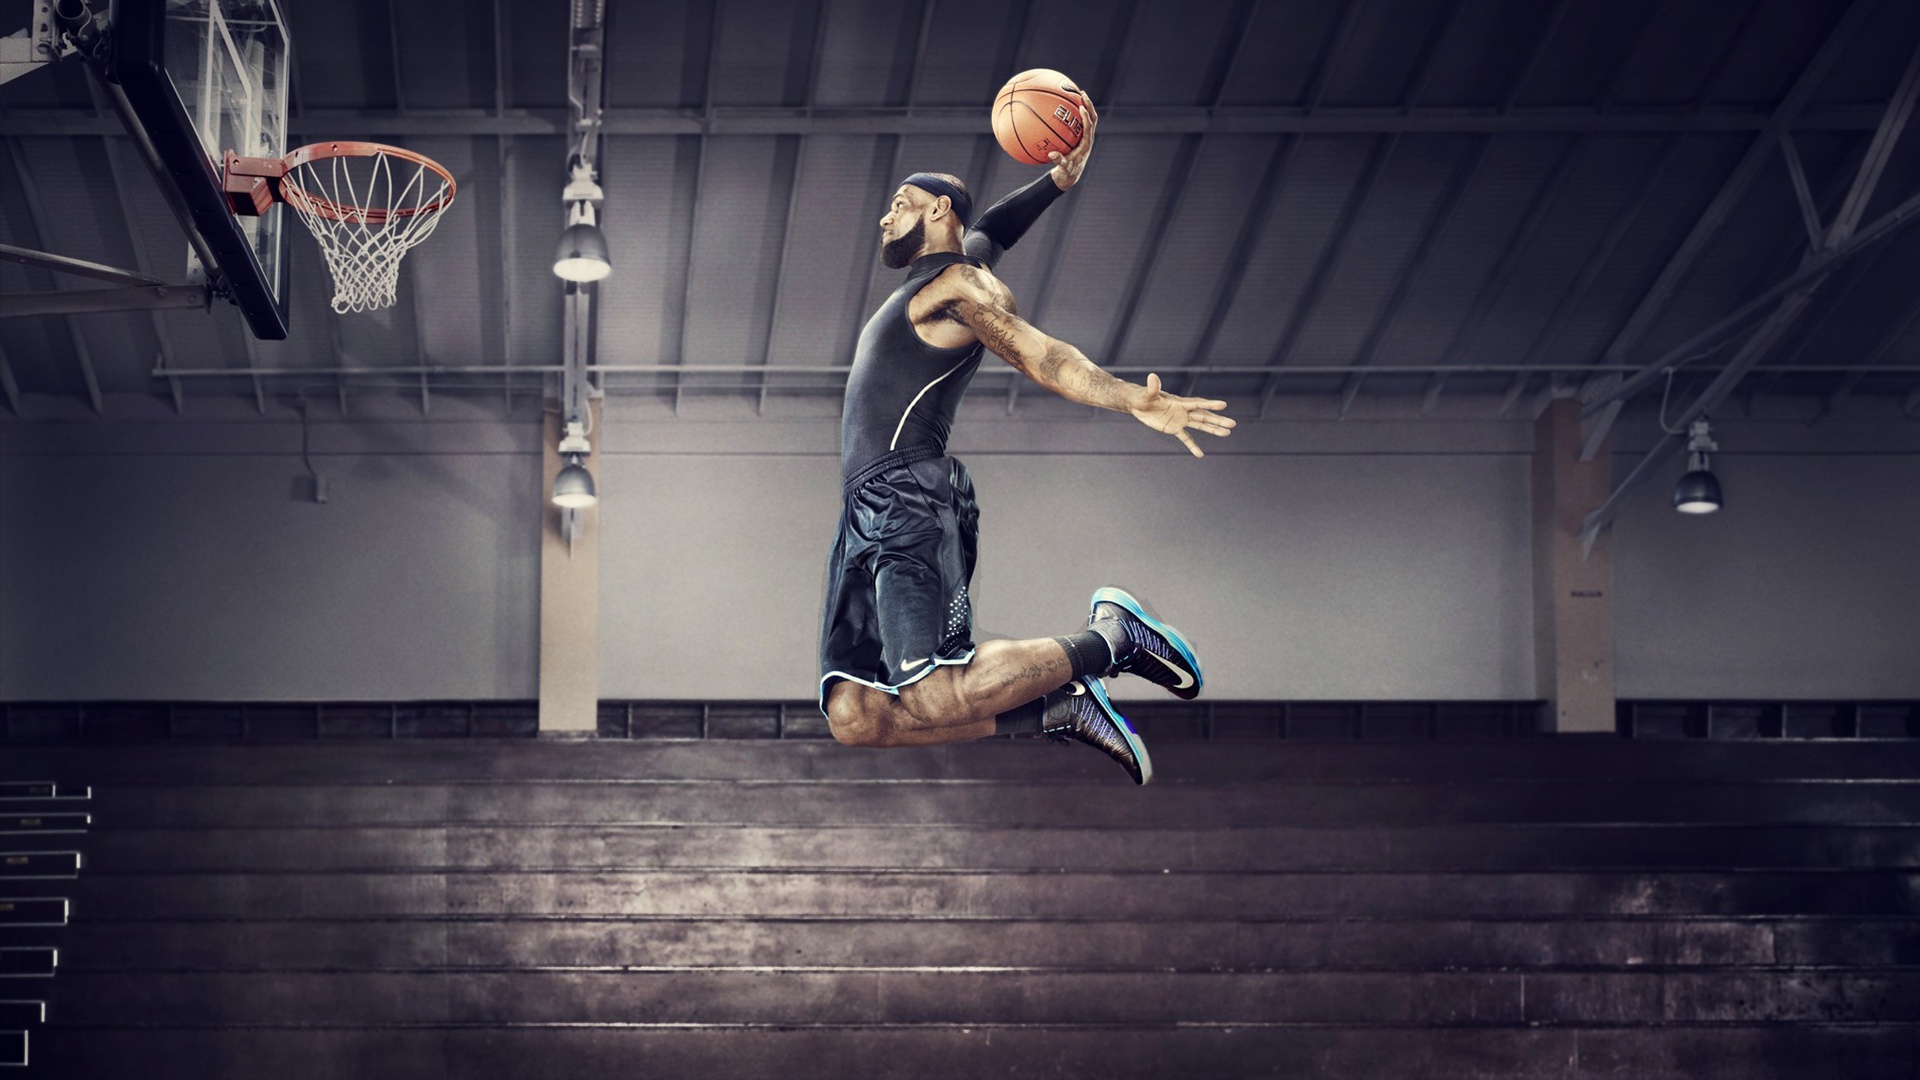 lebron james new nike logo wallpapers | CLAGS: Center for LGBTQ ...